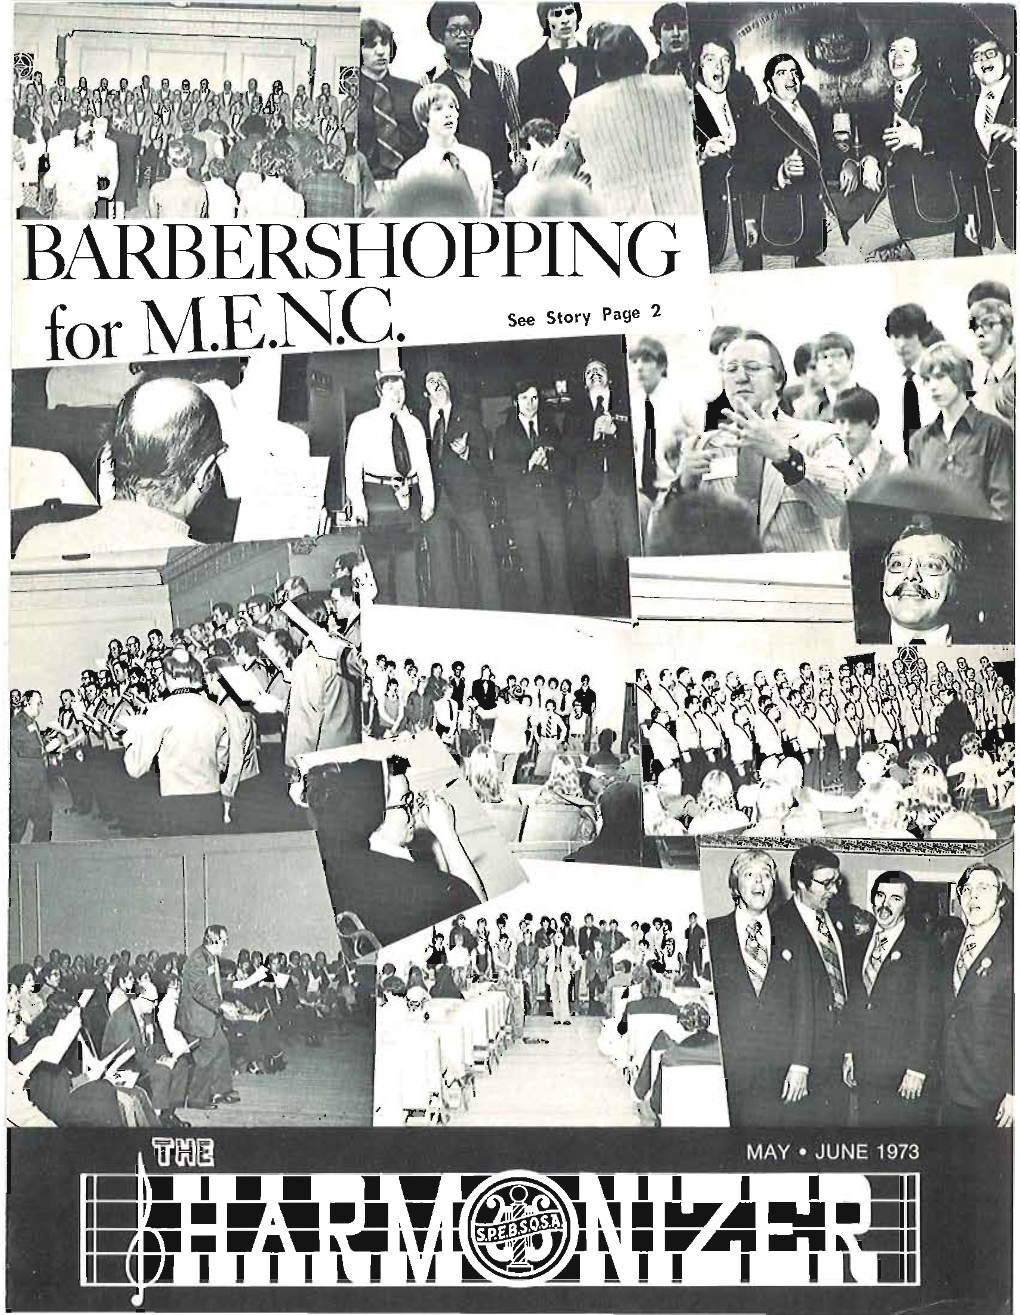 BARBERSHOPPING for M.E.N.C. the ~Un~Ones & Friendf Are Arouch of OLD Singing Your Song